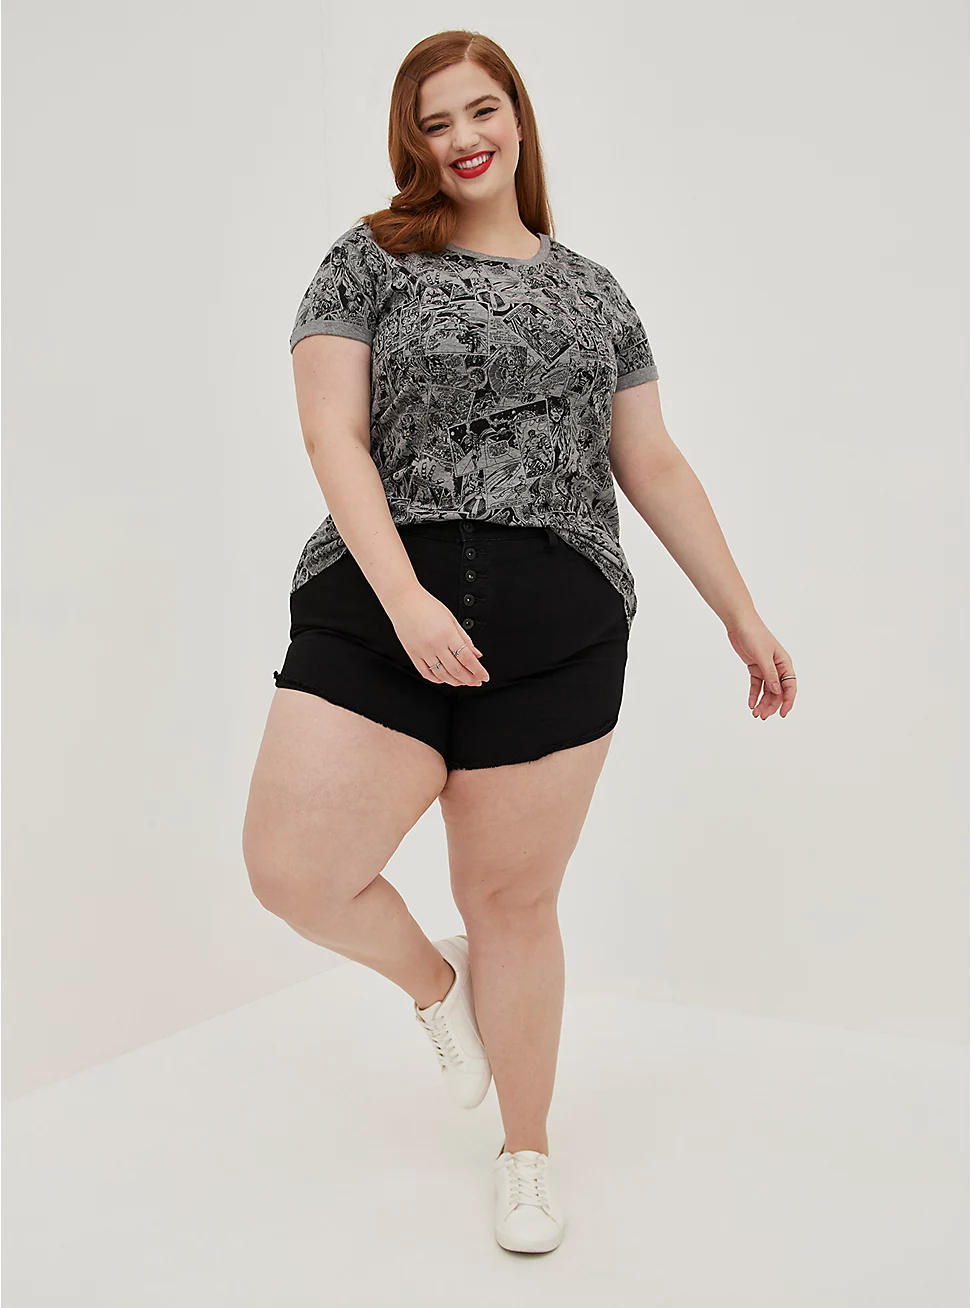 Assemble Your Wardrobe with New Marvel Styles from Torrid - Fashion